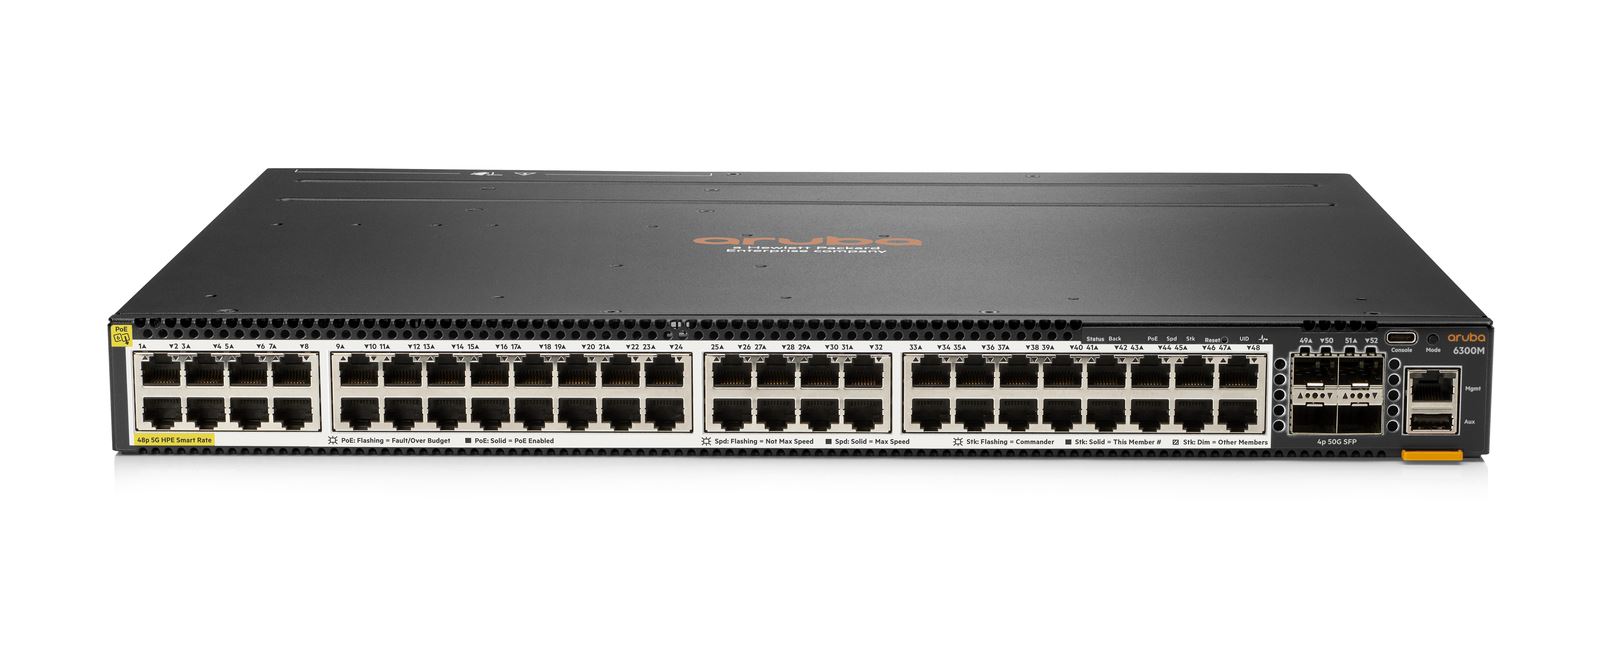 Aruba 6300M 48-port HPE Smart Rate 1/ 2.5/ 5GbE Class 6 PoE and 4-port SFP56 Switch0 